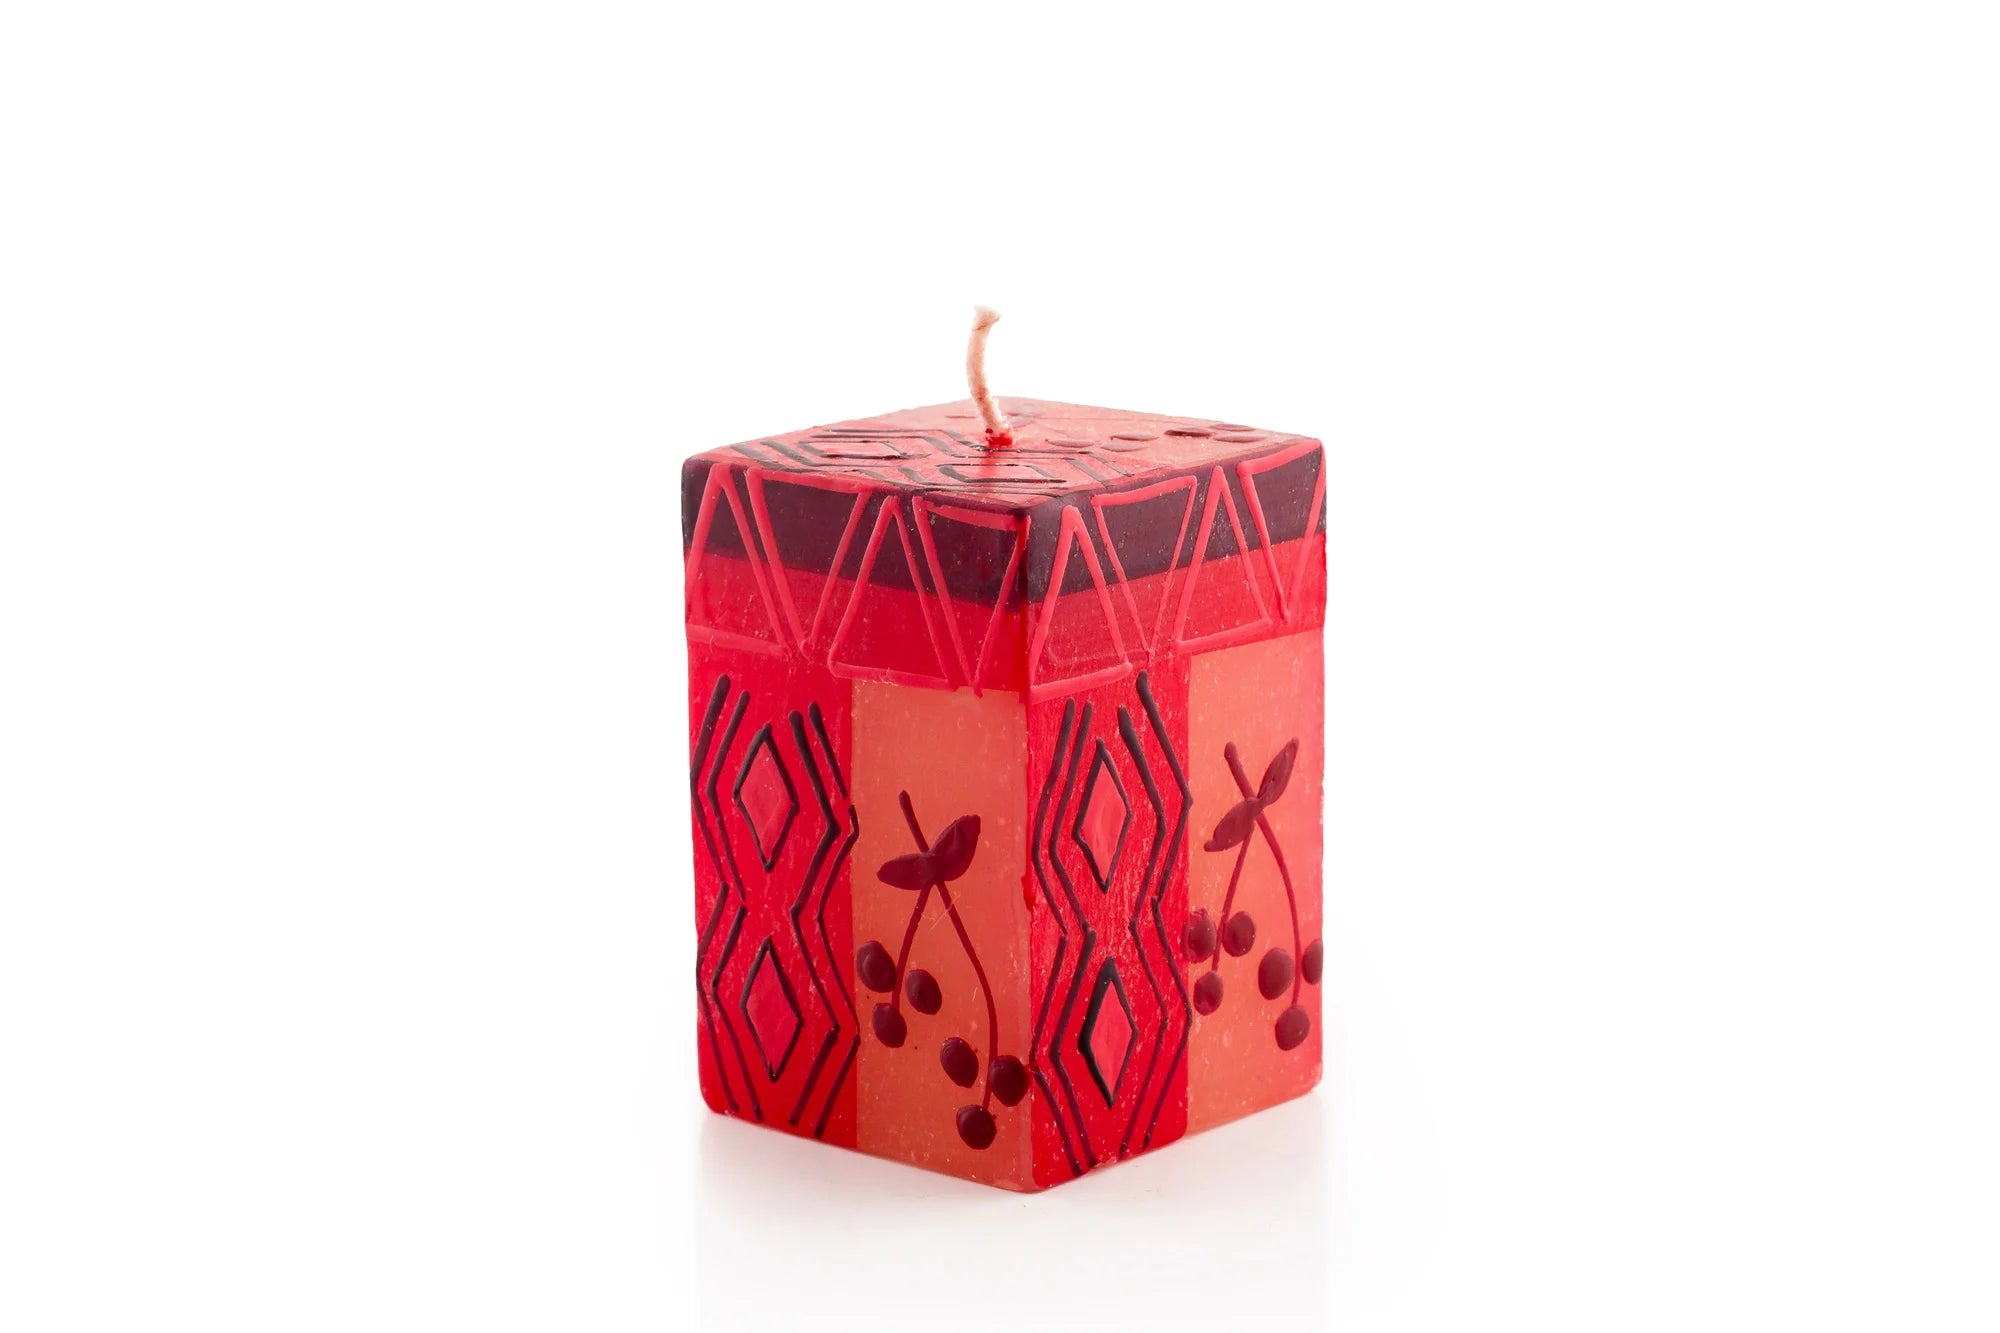 2" x 2" x 3" Berry Blaze cube candle. Bright red with darker berry design mixed with geometric design.